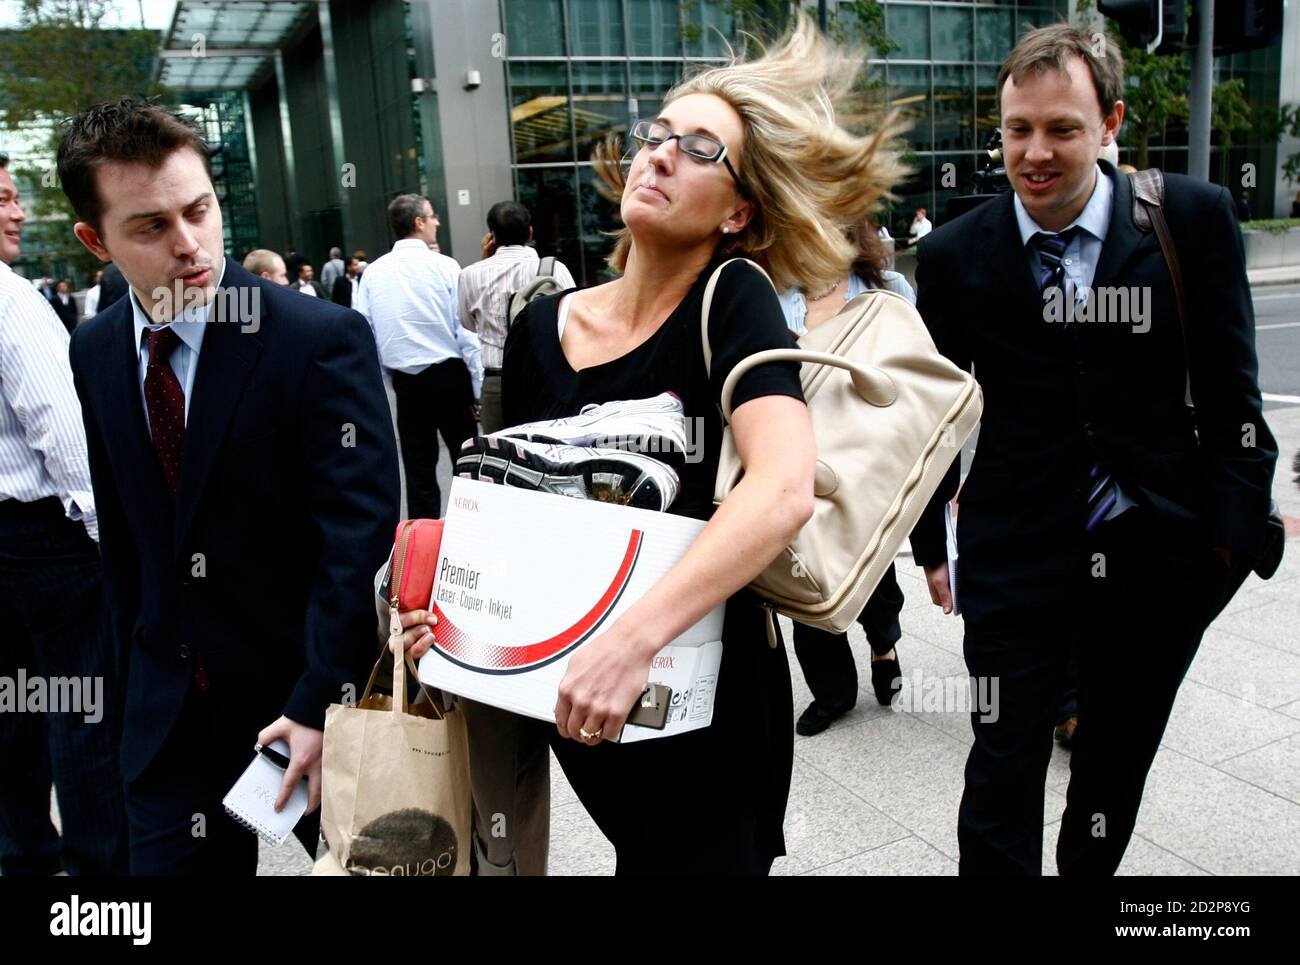 A worker carries a box as she walks away from the office of the U.S. investment bank Lehman Brothers in the Canary Wharf district of London in this September 15, 2008 file photo. For months, the staff and consultants have sorted through a maze of derivatives contracts, real estate and other assets that were left in chaos on the morning of Sept. 15, 2008, when the 158-year-old Wall Street firm sought bankruptcy protection and helped trigger a near-collapse of the global financial system. To match feature LEHMAN/RUBBLE      REUTERS/Andrew Winning/Files   (BRITAIN BUSINESS) Foto Stock